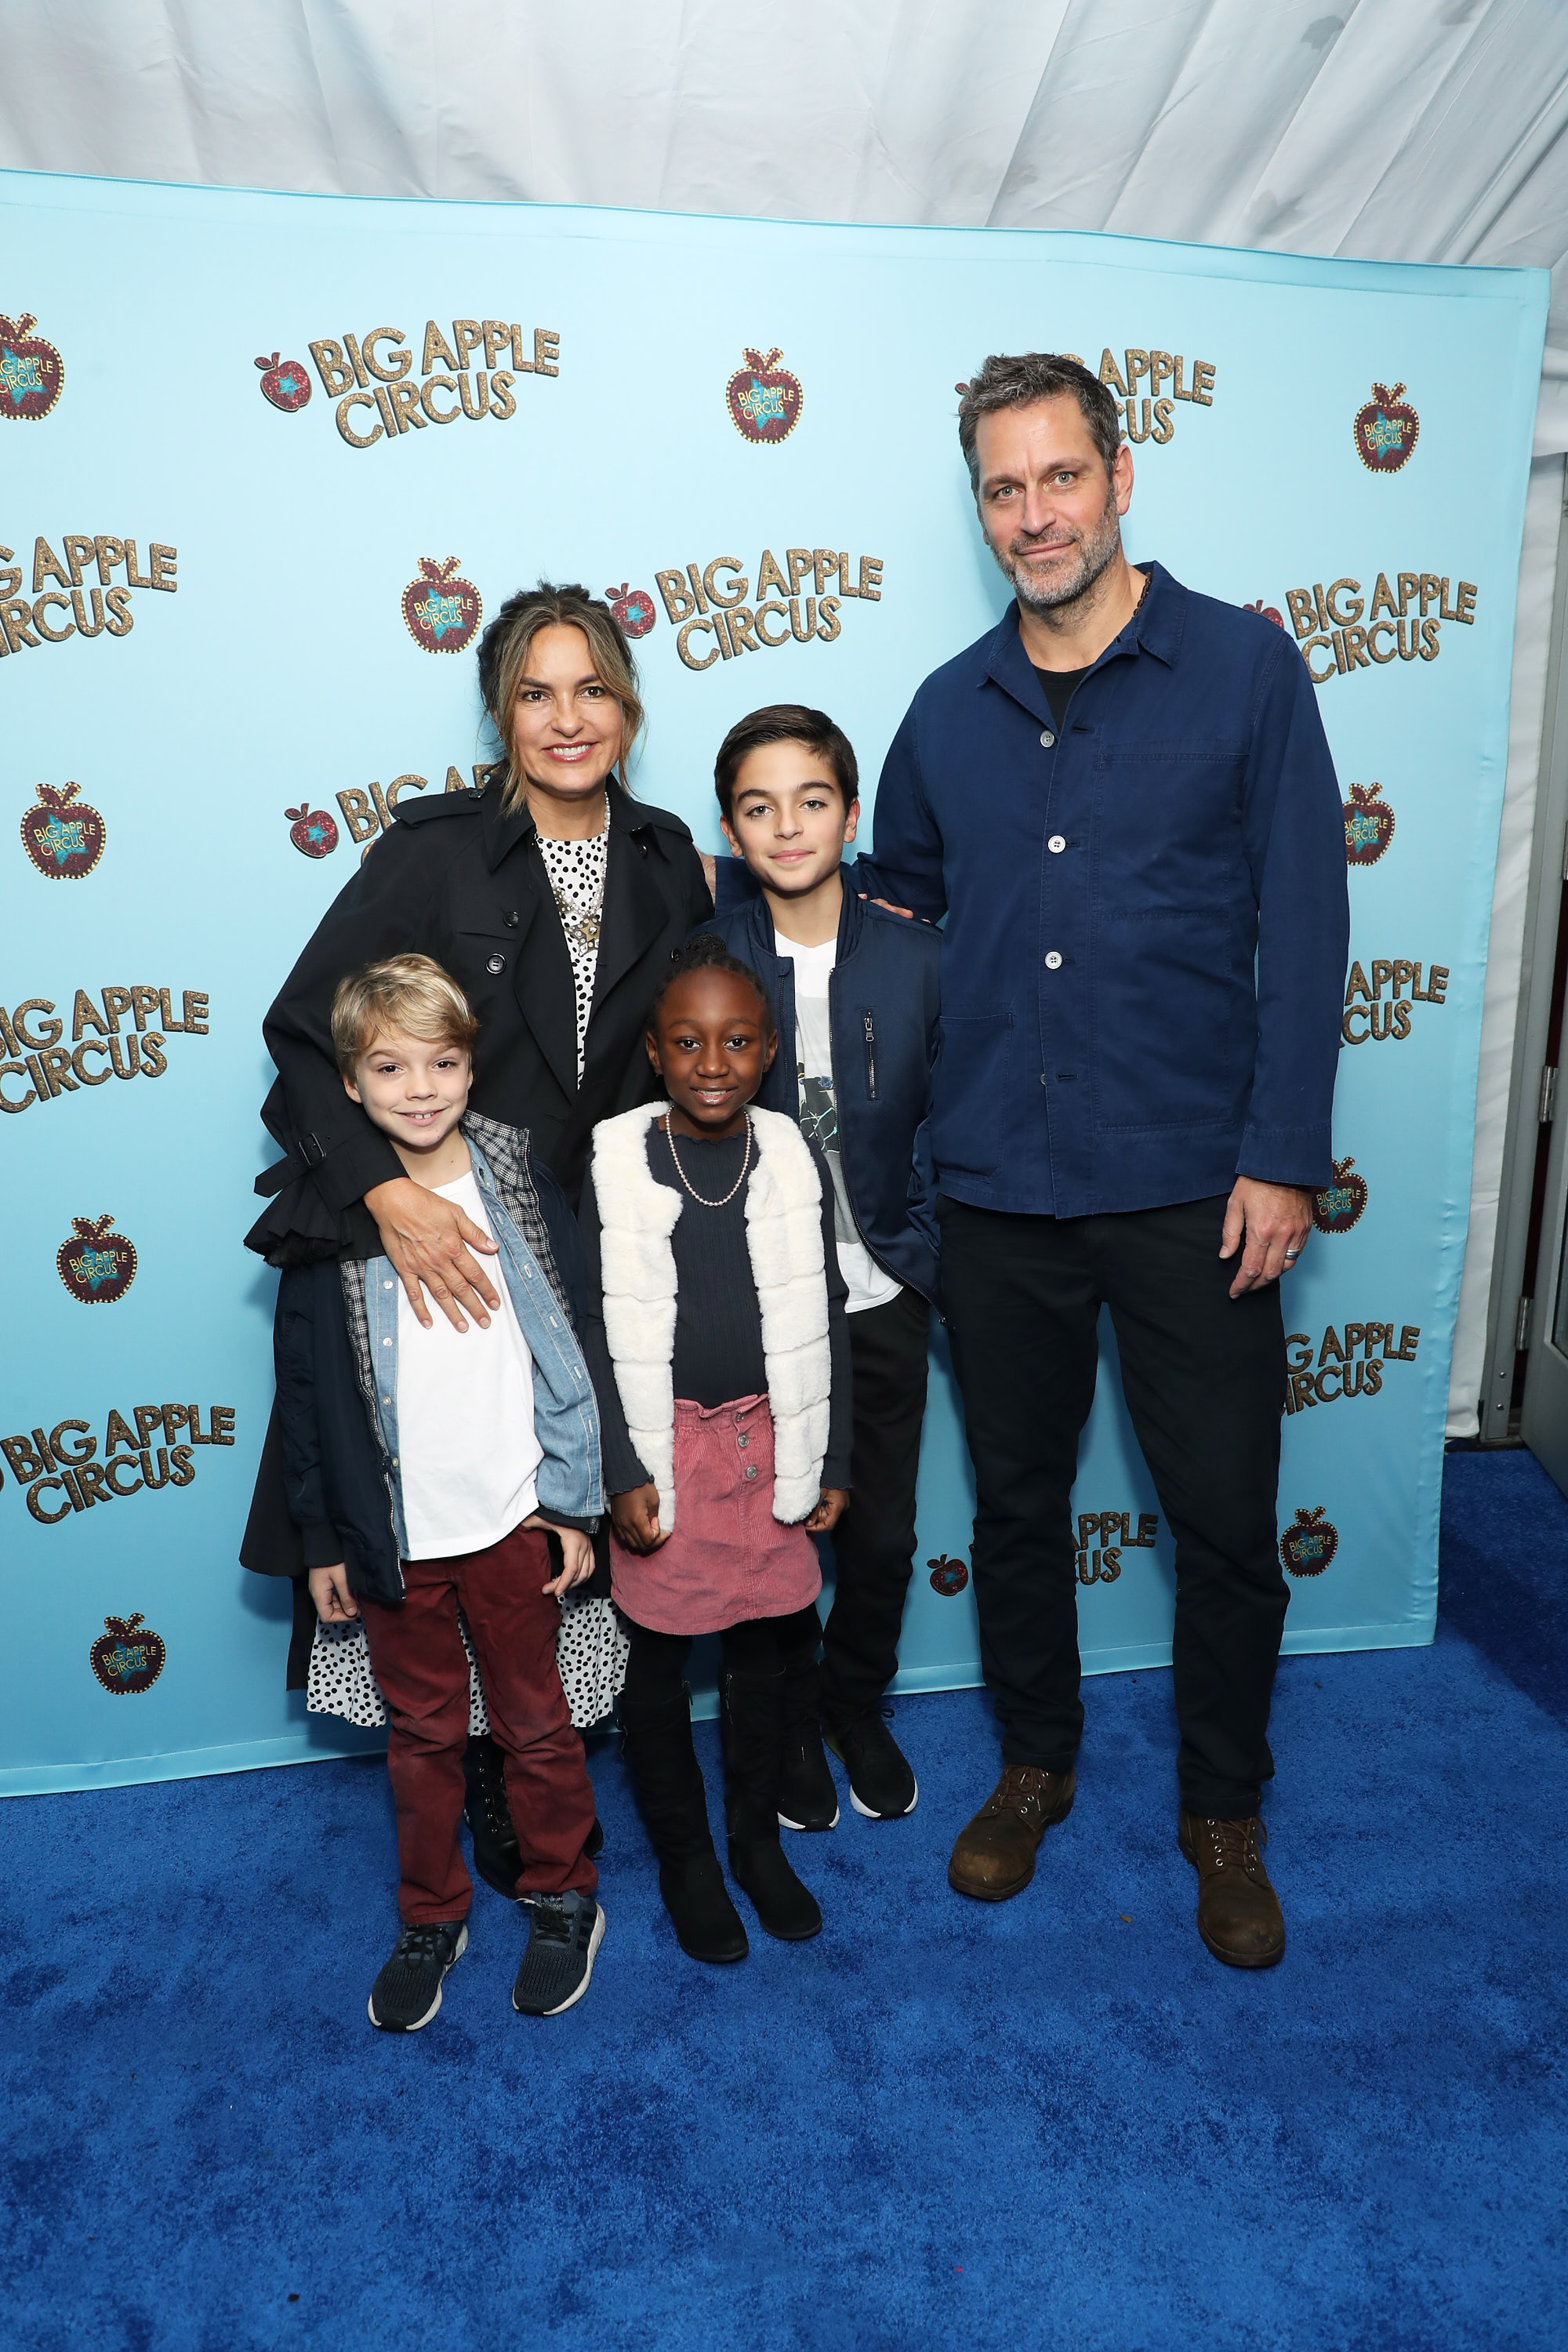 Mariska Hargitay with Peter Hermann and their children at the Opening Night of Big Apple Circus on October 27, 2019 in New York. | Source: Getty Images